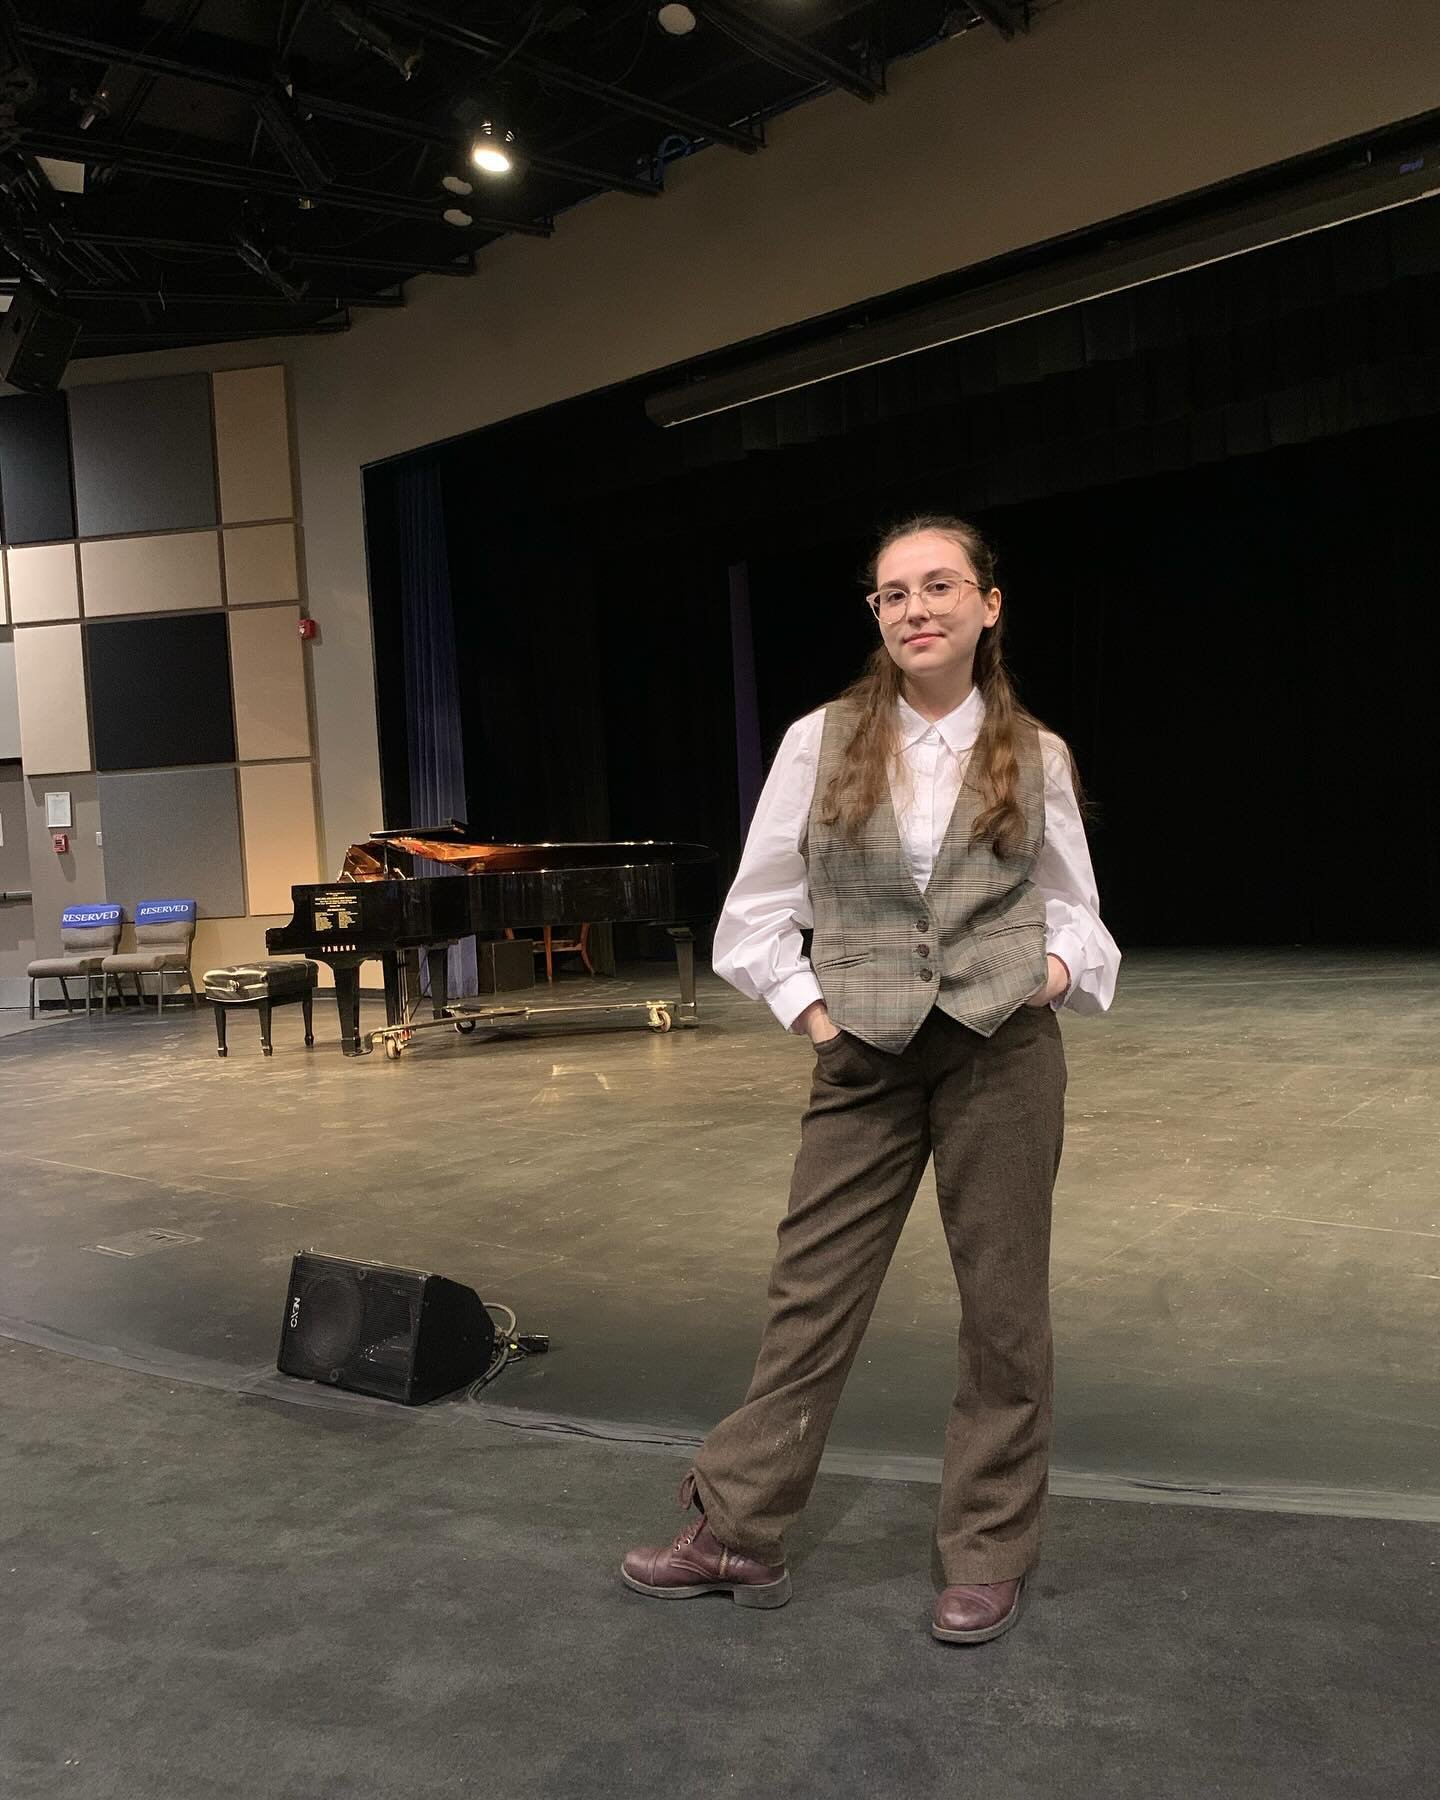 I&rsquo;m so proud of how far Zoe has come in her vocal training this year.

Her performance of Astonishing from the musical Little Women earned her an award and more!